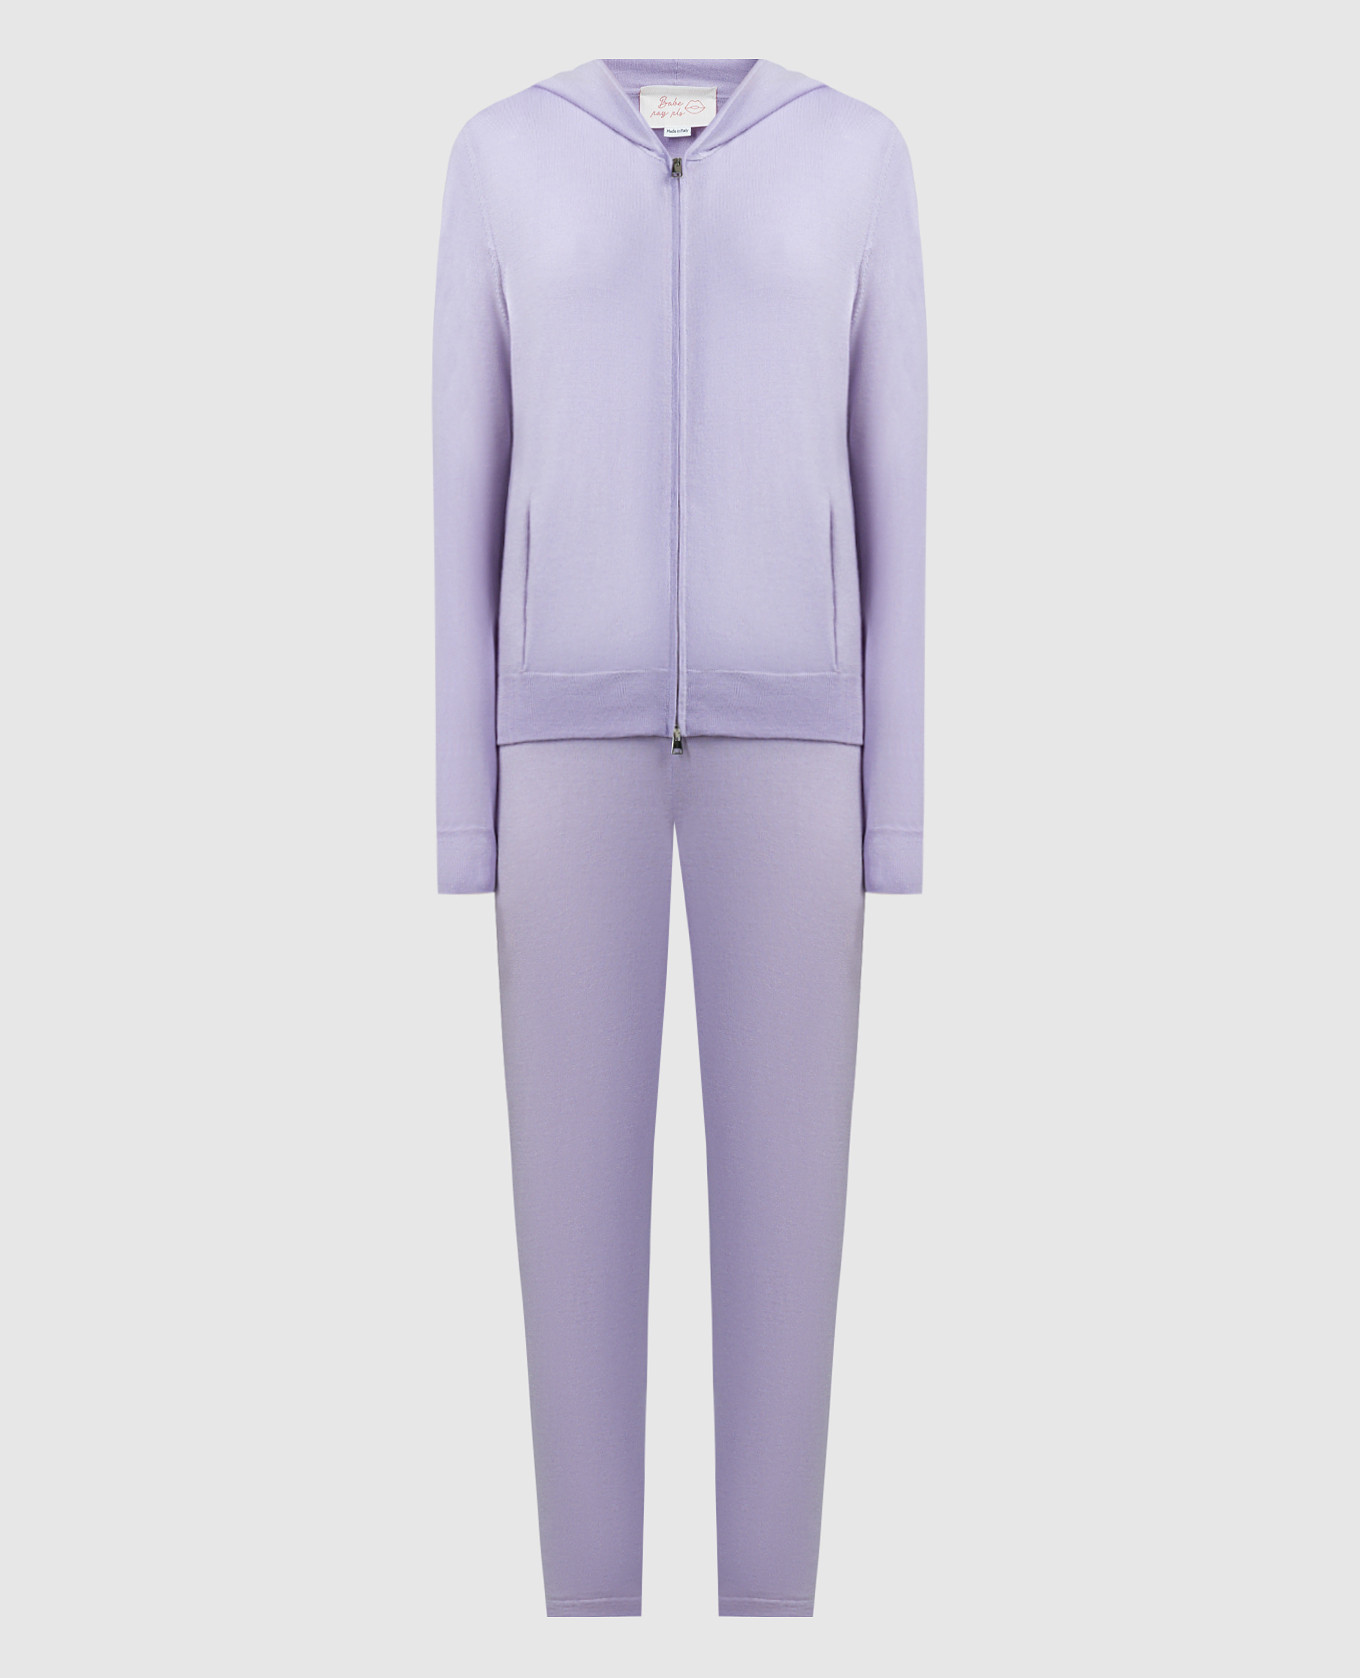 Purple sports suit made of wool